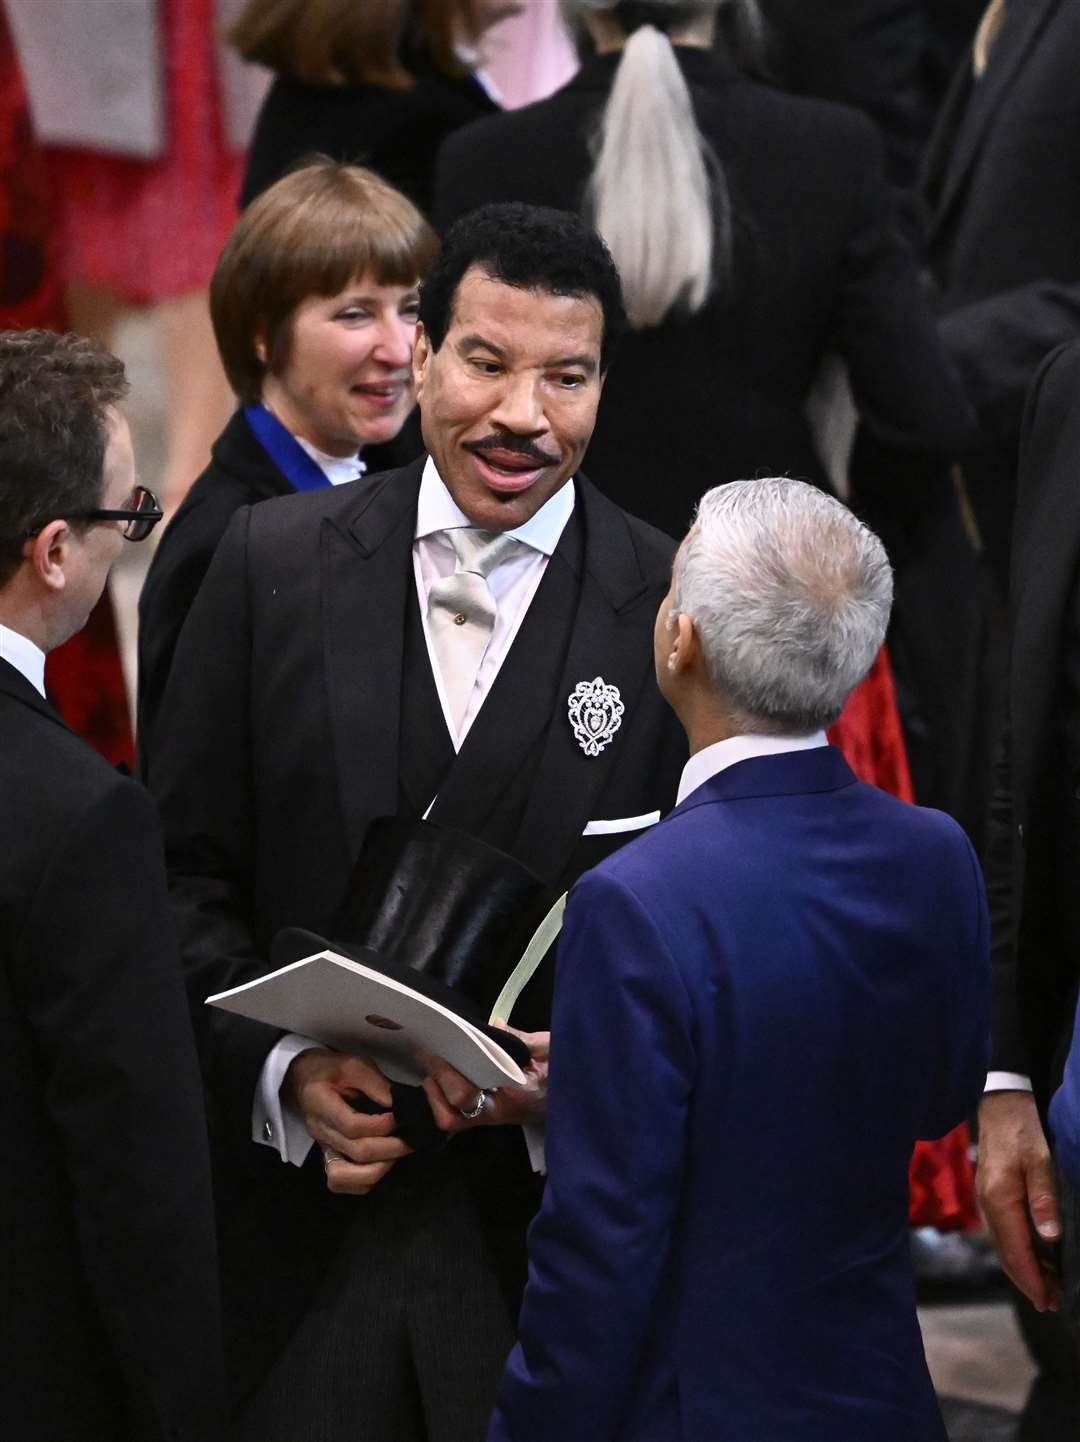 Lionel Richie arriving at Westminster Abbey (Gareth Cattermole/PA)